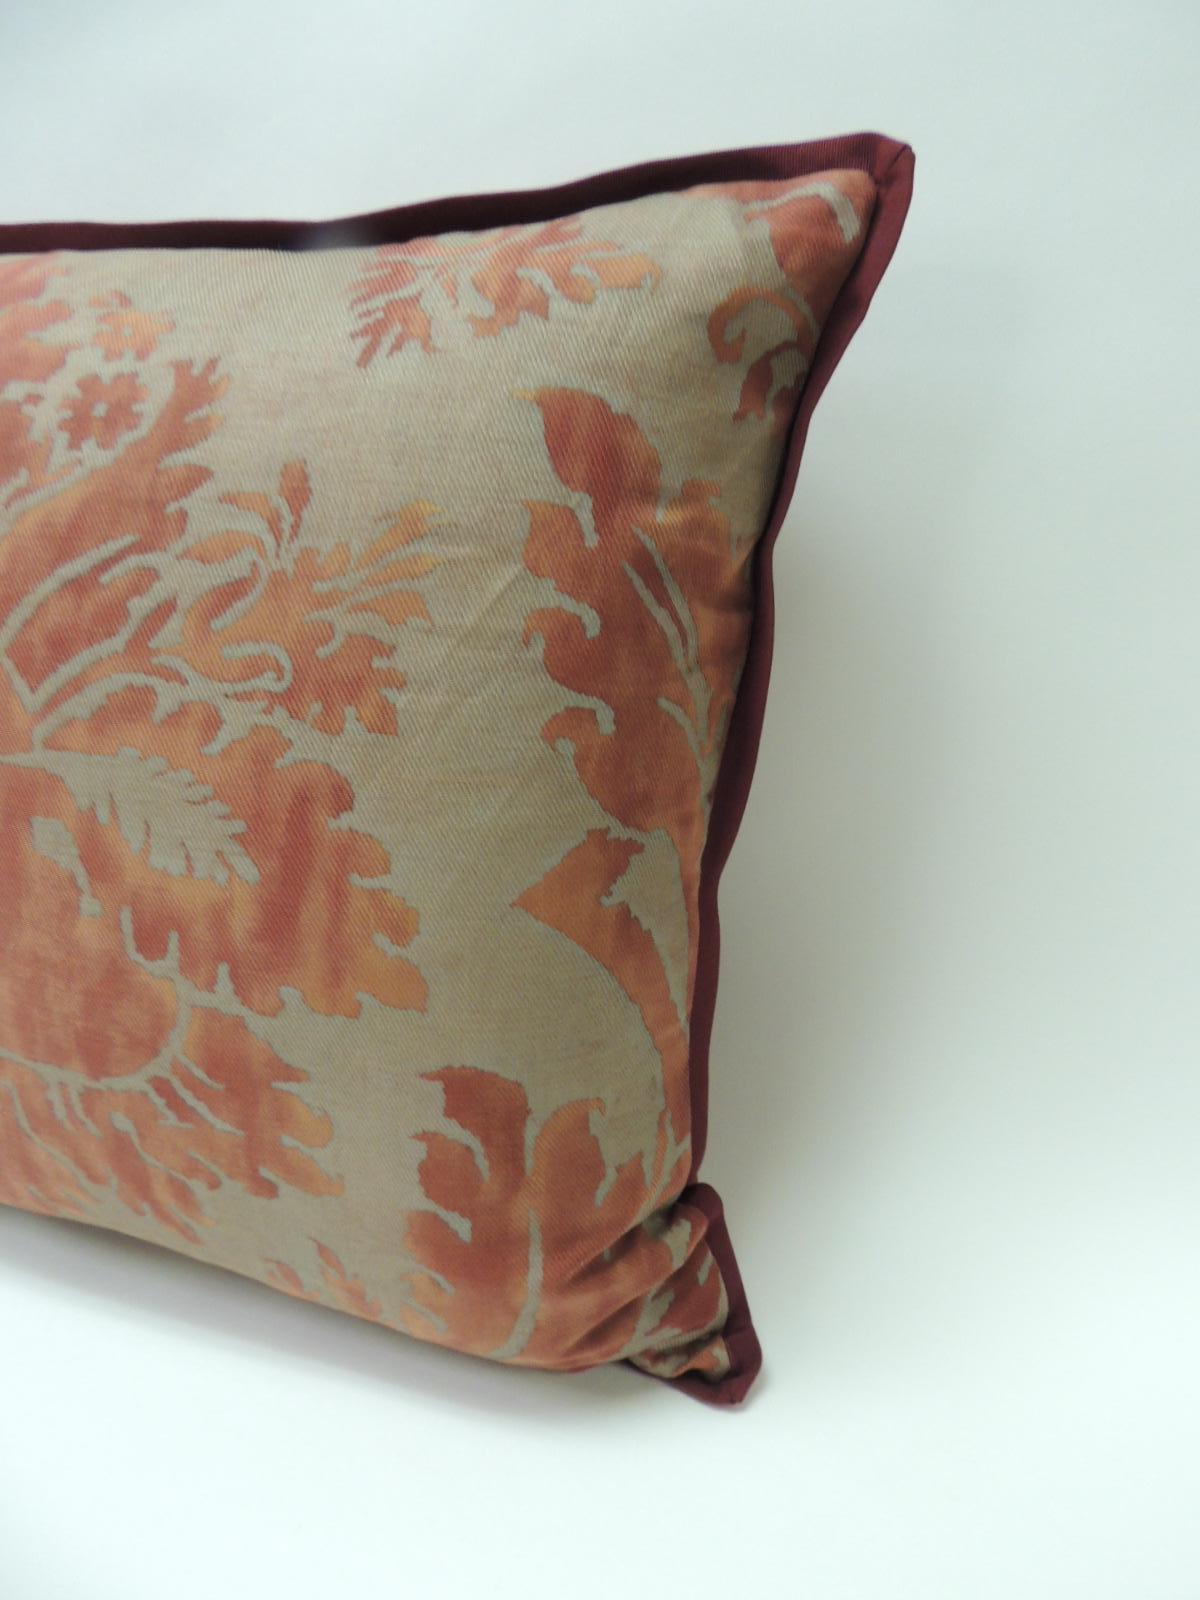 Pair of red on silvery gold Italian Fortuny Glicine decorative pillow. According to the fabric appendix of Fortuny Interiors, this pattern of textile is a 17th century Italian design with a Wisteria motif. The Italian Fortuny Glicine front panel of